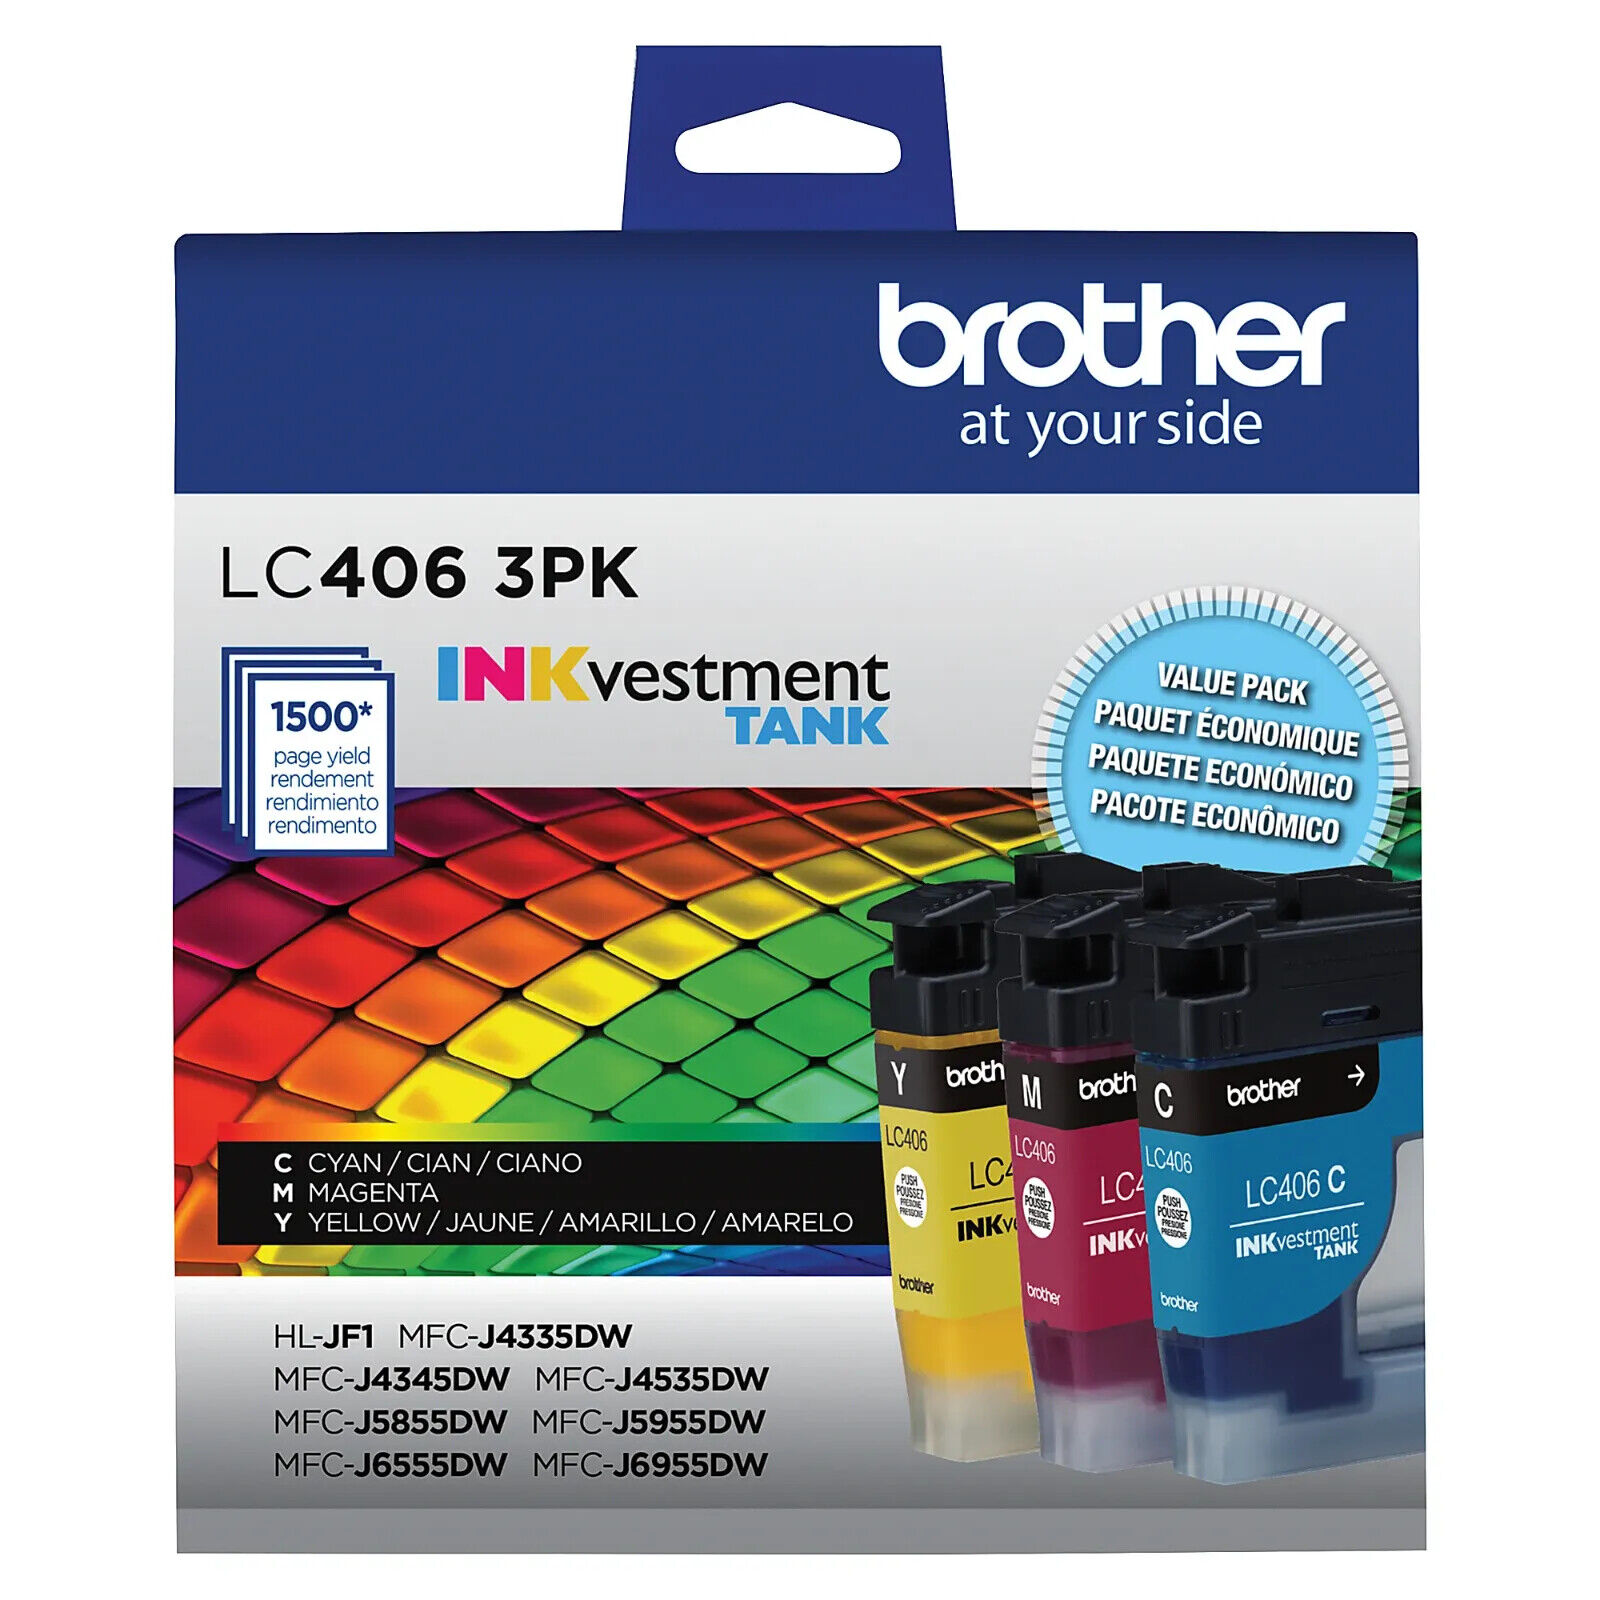 Genuine Brother LC406XL / LC406 INKvestment Tank Ink Cartridges Black or Colors